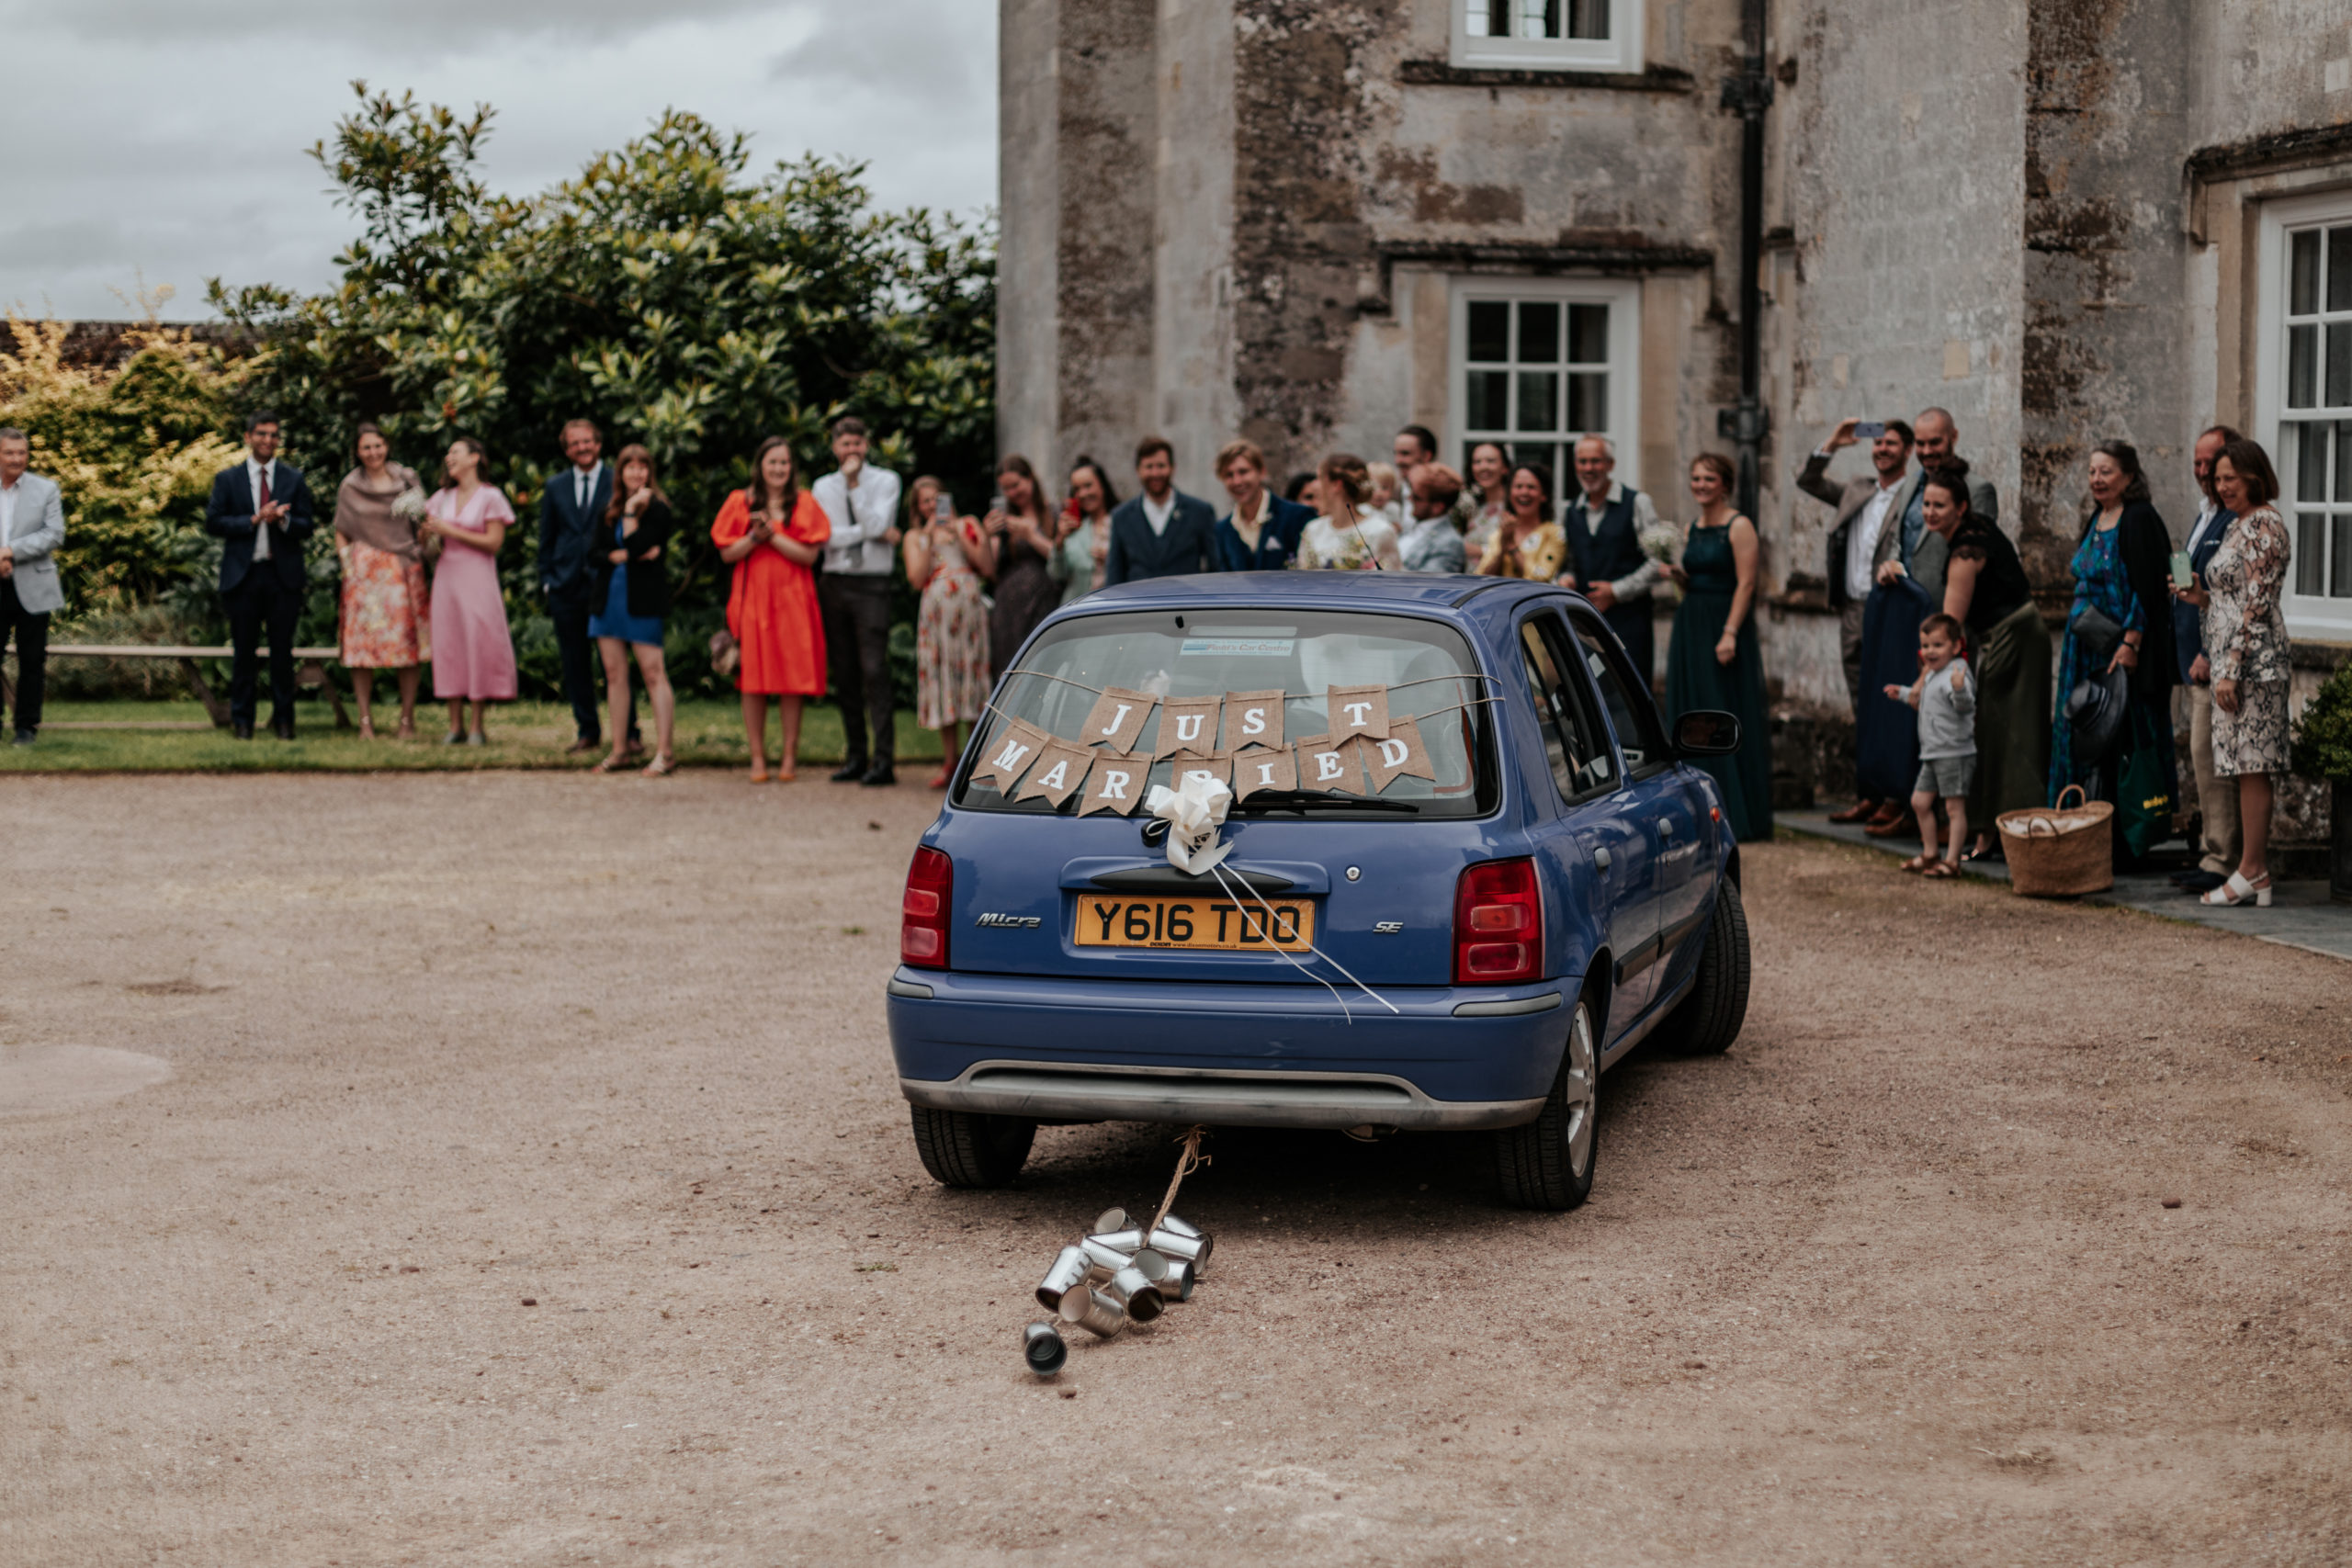 Sarah & Cam's old Nissan Micra pick them up to take them to their festival wedding reception, with cans tied to the back